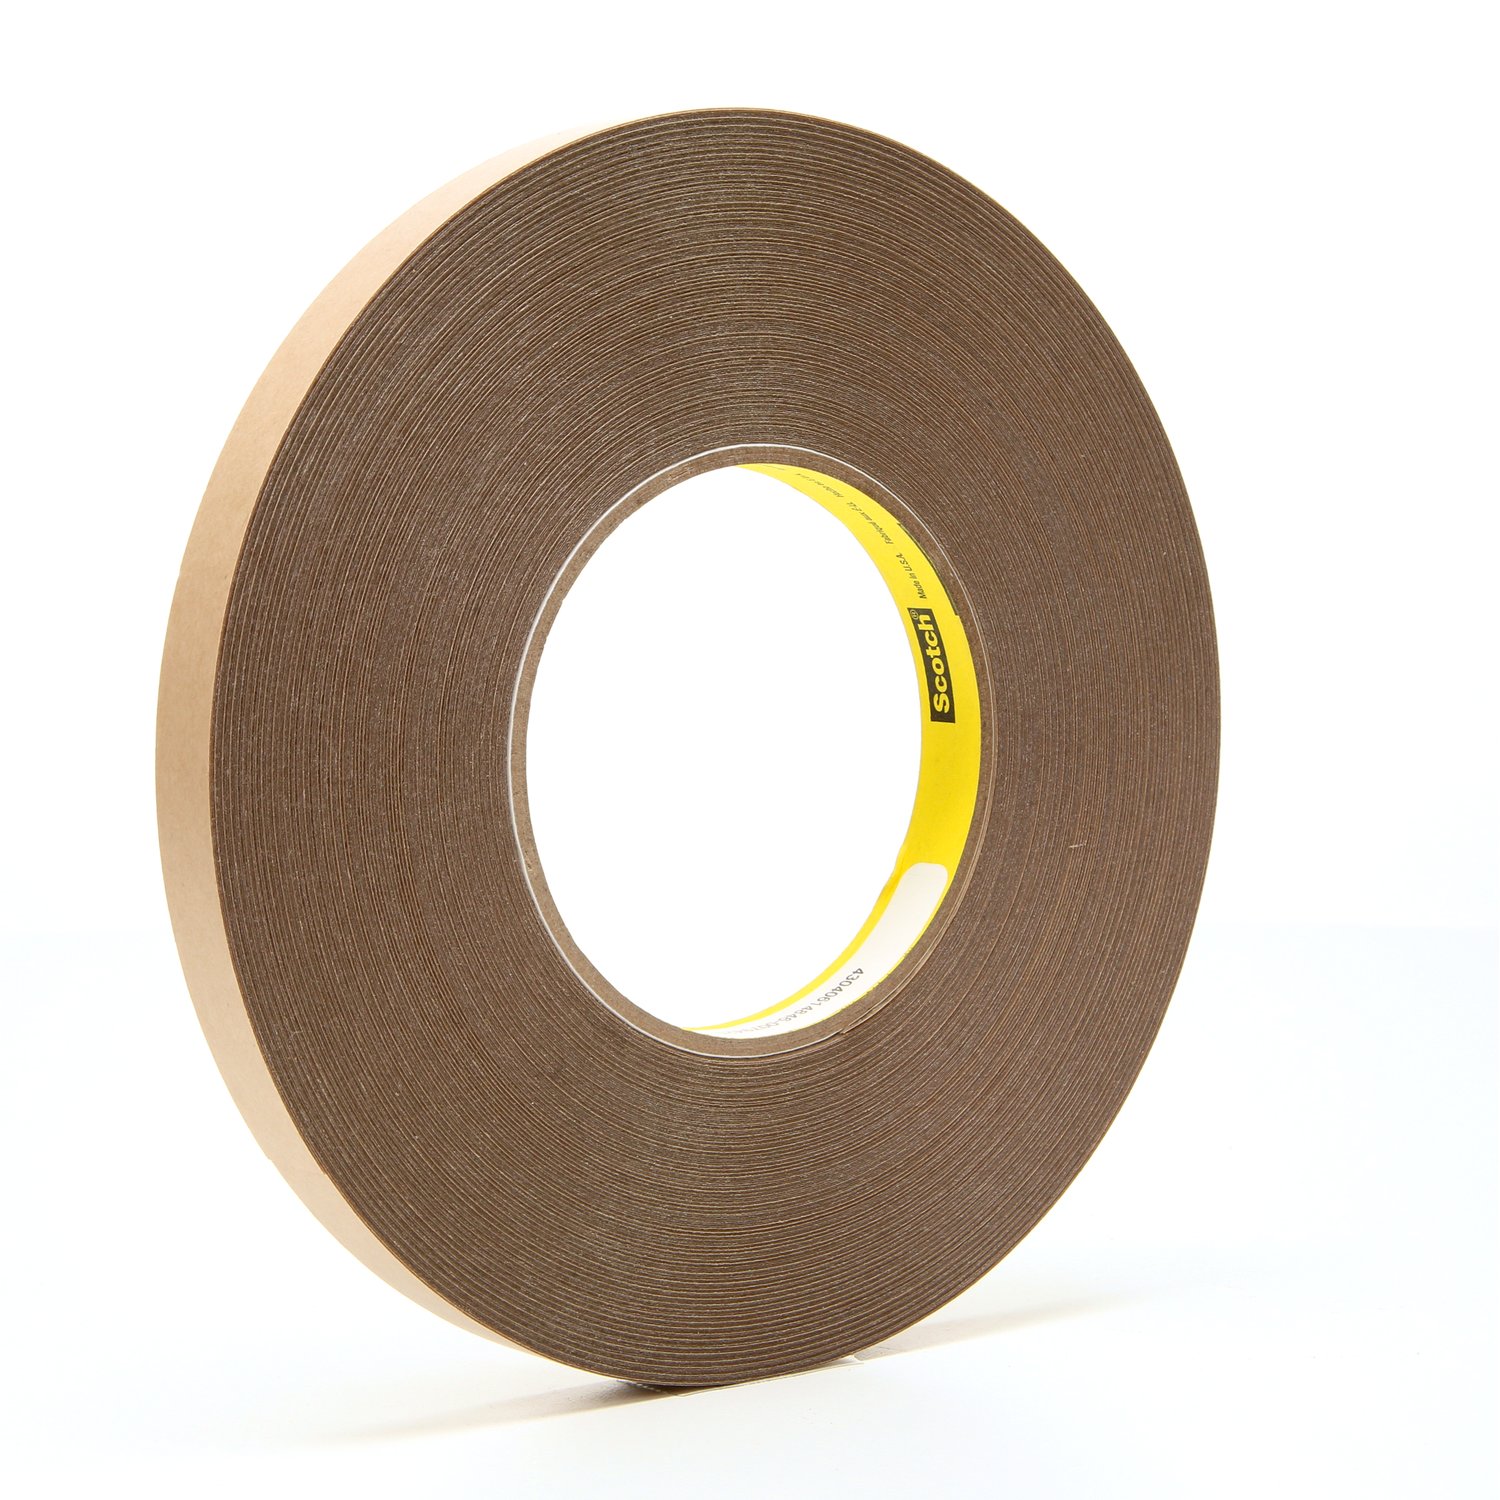 7000048527 - 3M Removable Repositionable Tape 9425, Clear, 1/2 in x 72 yd, 5.8 mil,
18 rolls per case